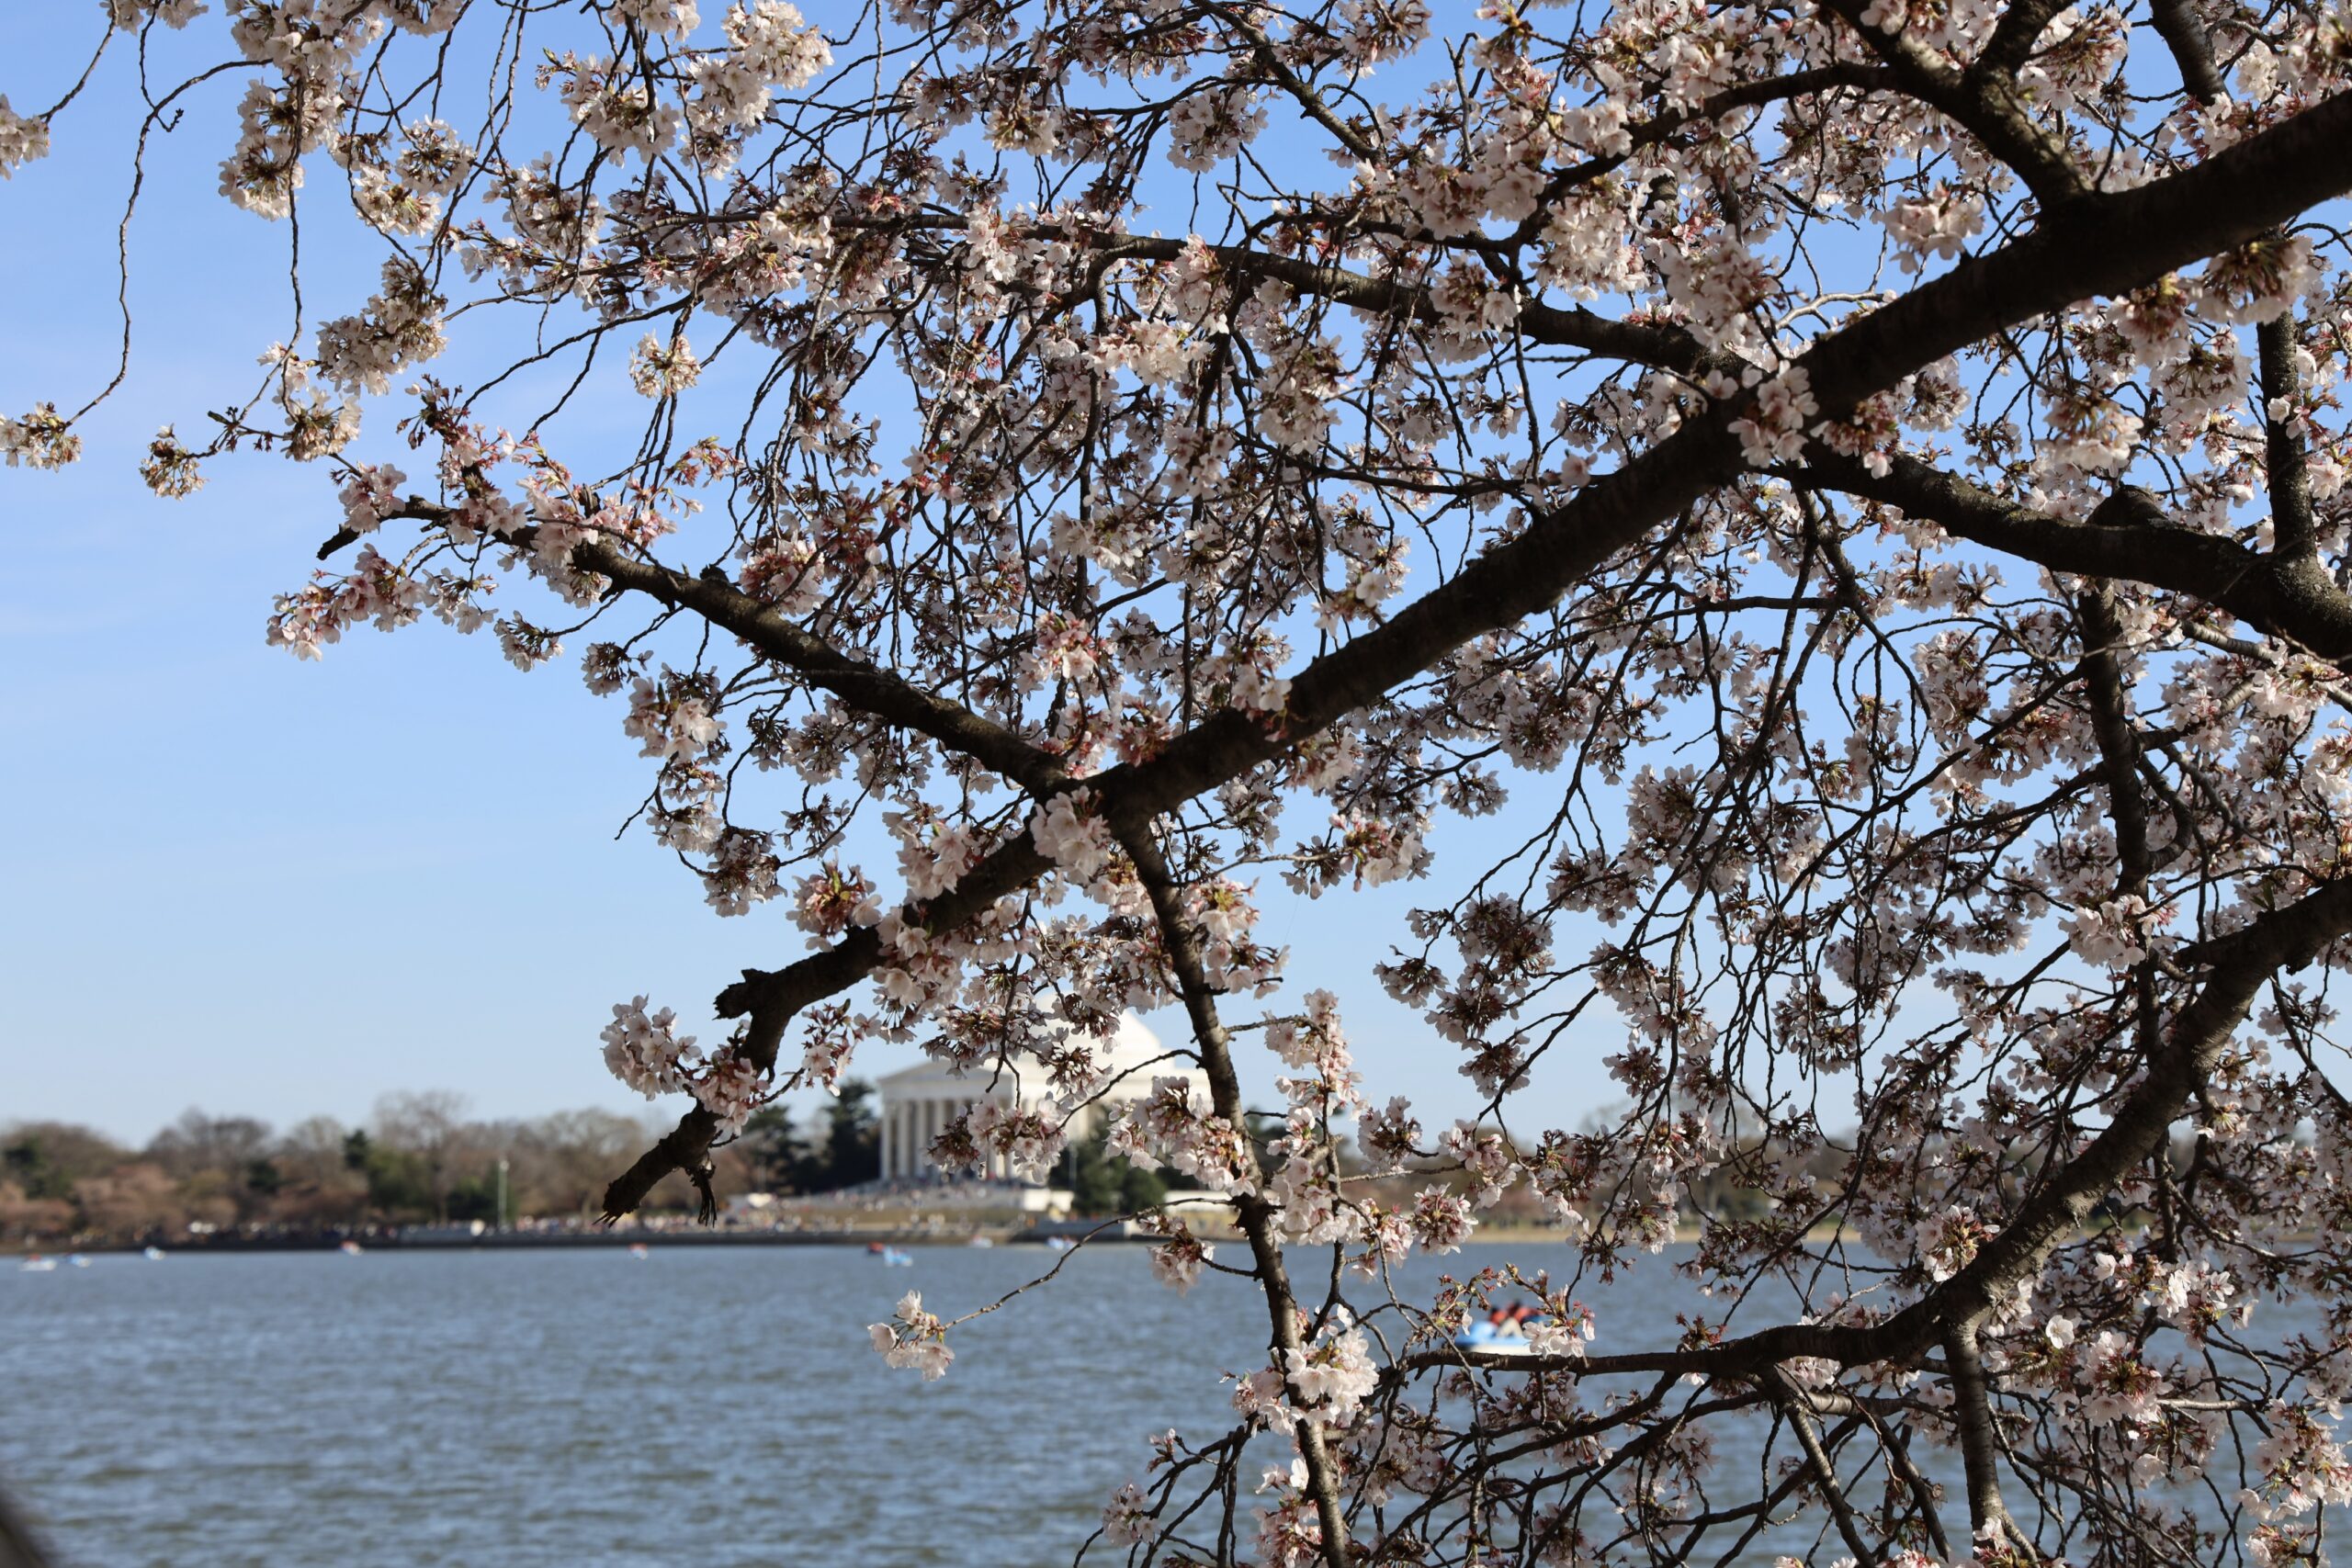 Cherry blossoms in Washington D.C. with the Jefferson Memorial in the background